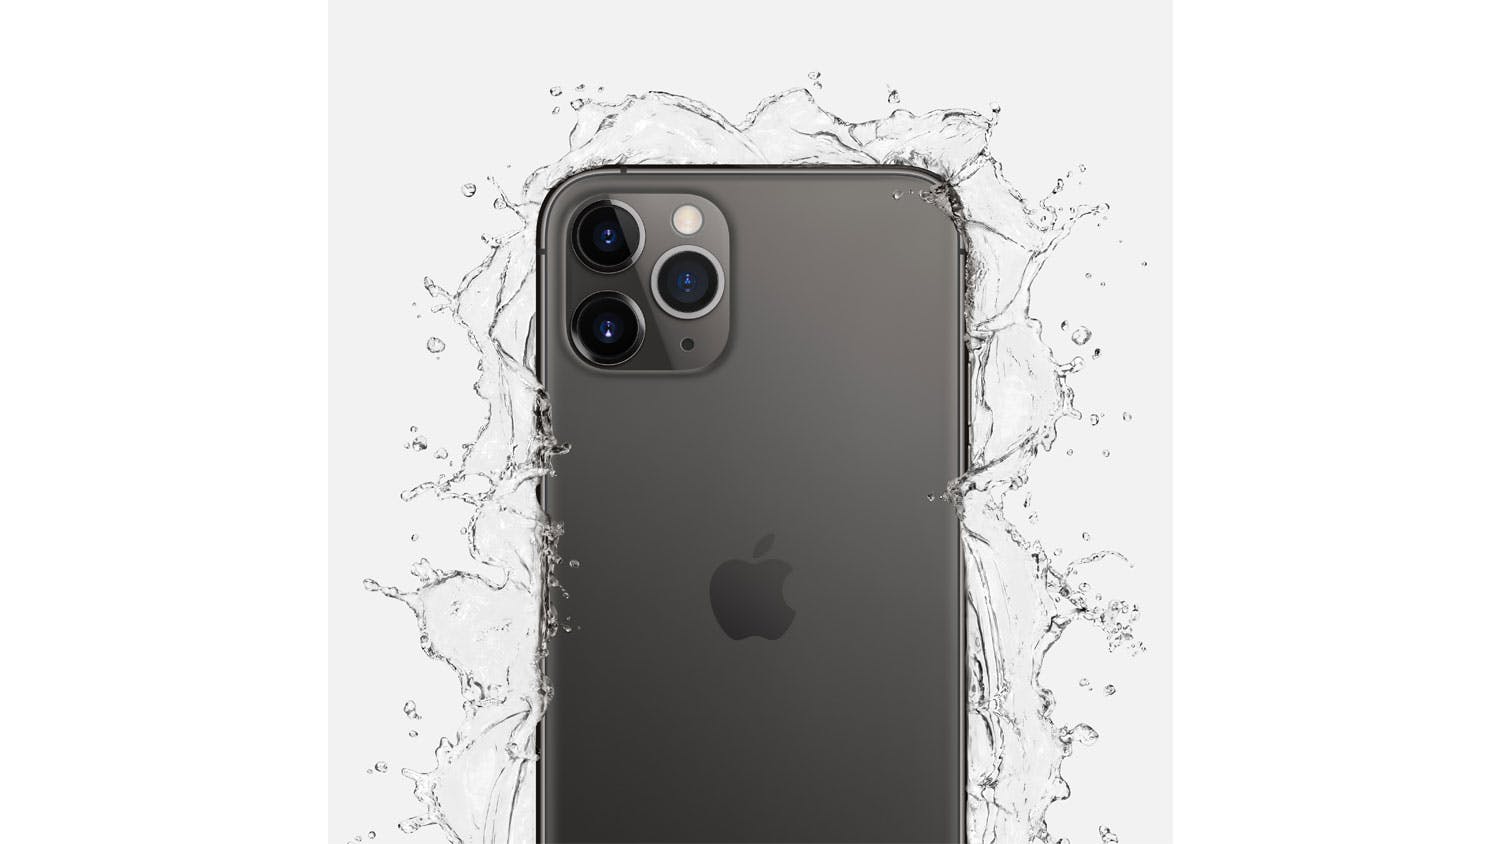 Iphone 11 Pro Max 512gb On Spark Space Grey Harvey Norman